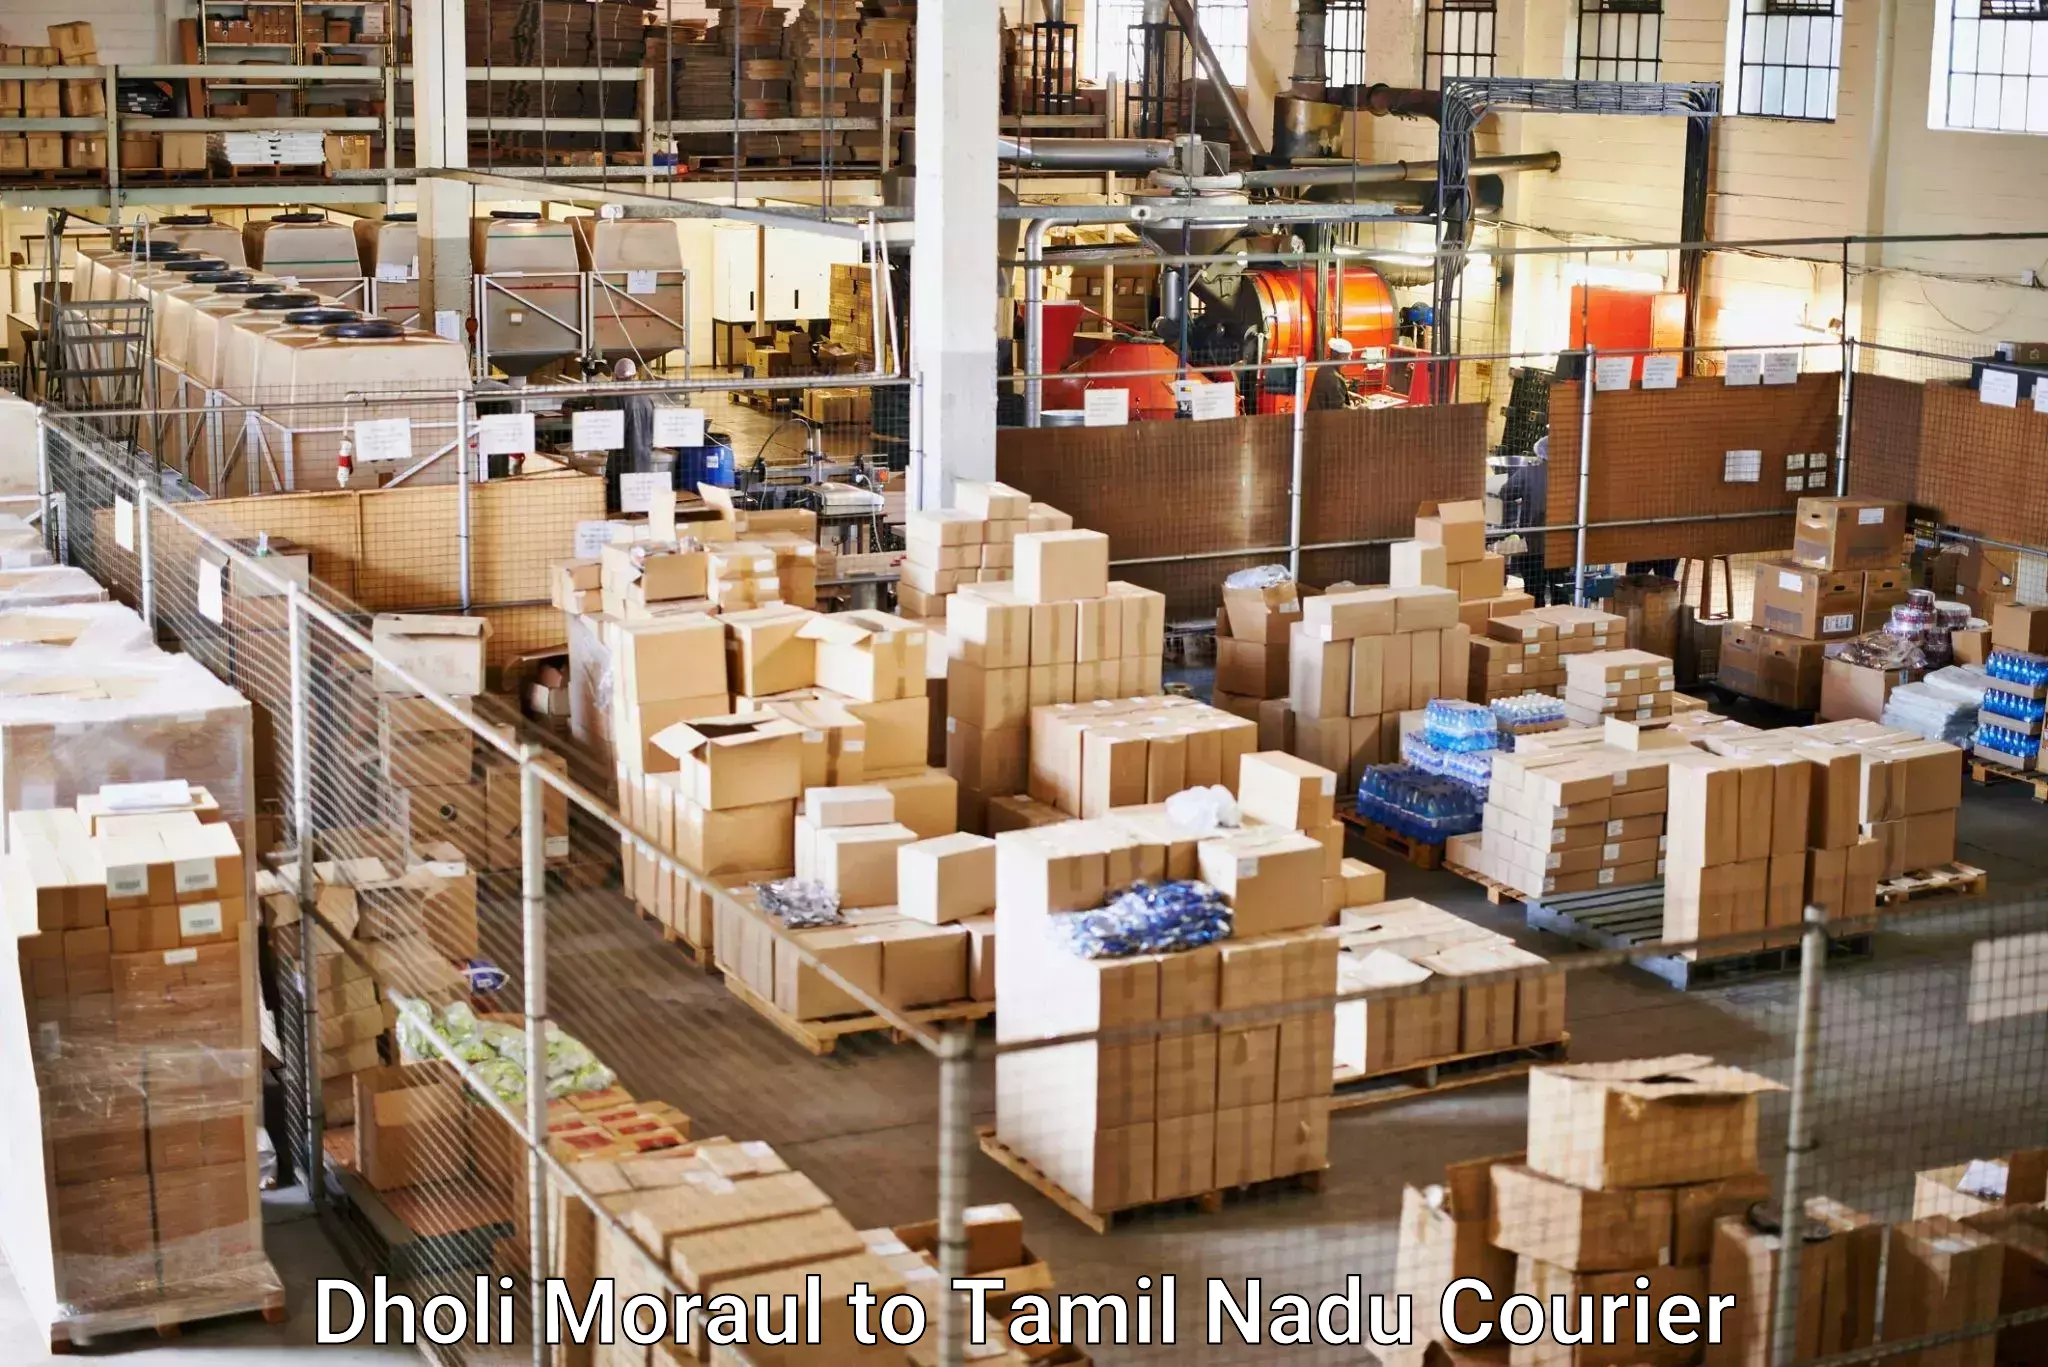 Round-the-clock parcel delivery Dholi Moraul to Chennai Port